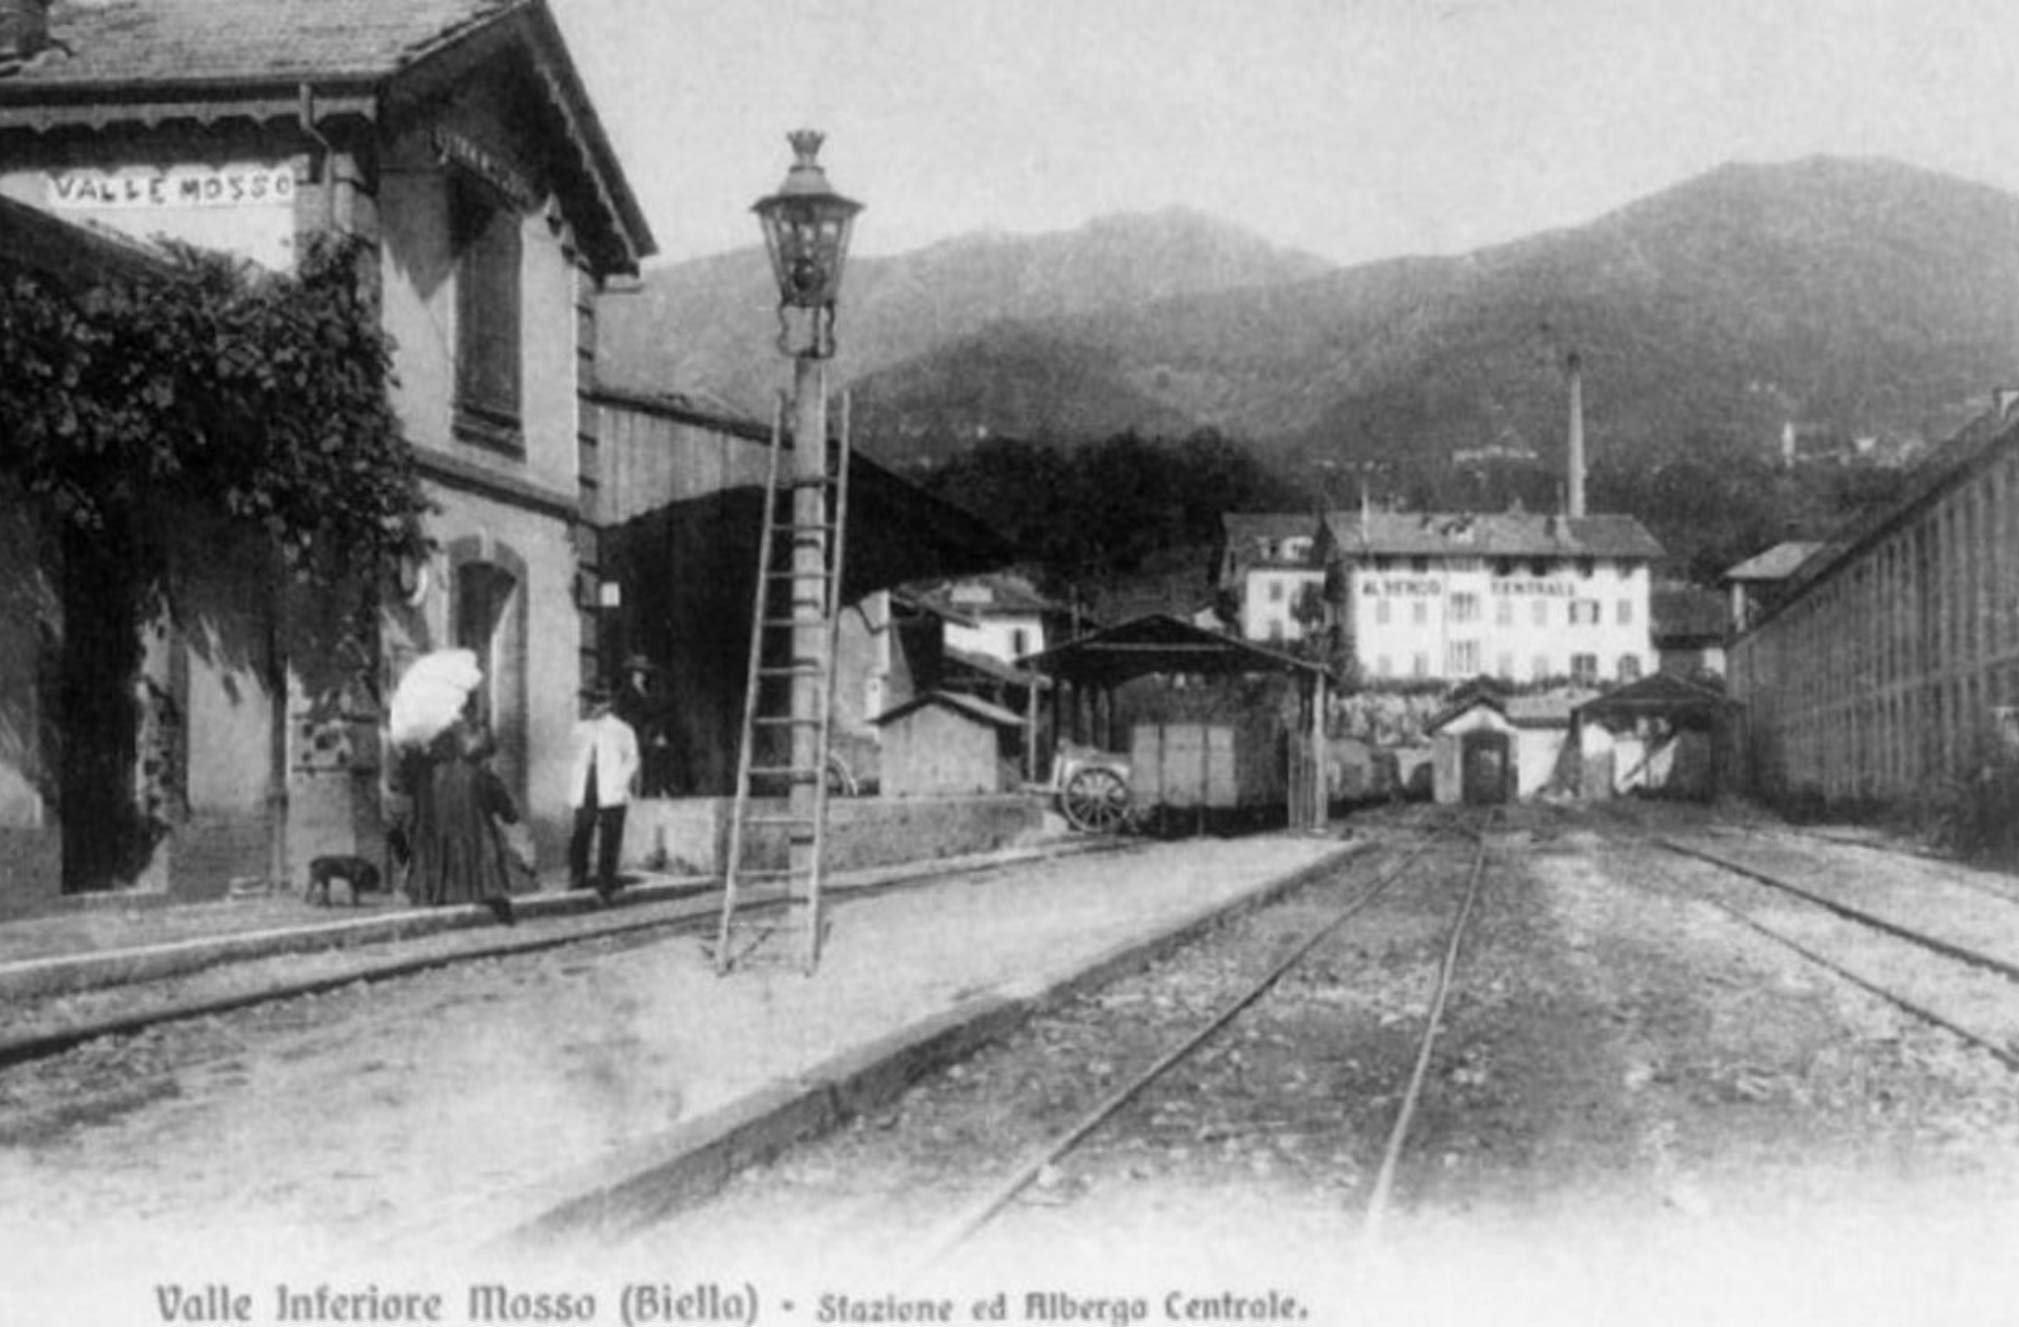 Photo of the Valle Mosso station and Albergo Centrale, at the time of the banquet for the opening of the new Barberis Canonico plant.